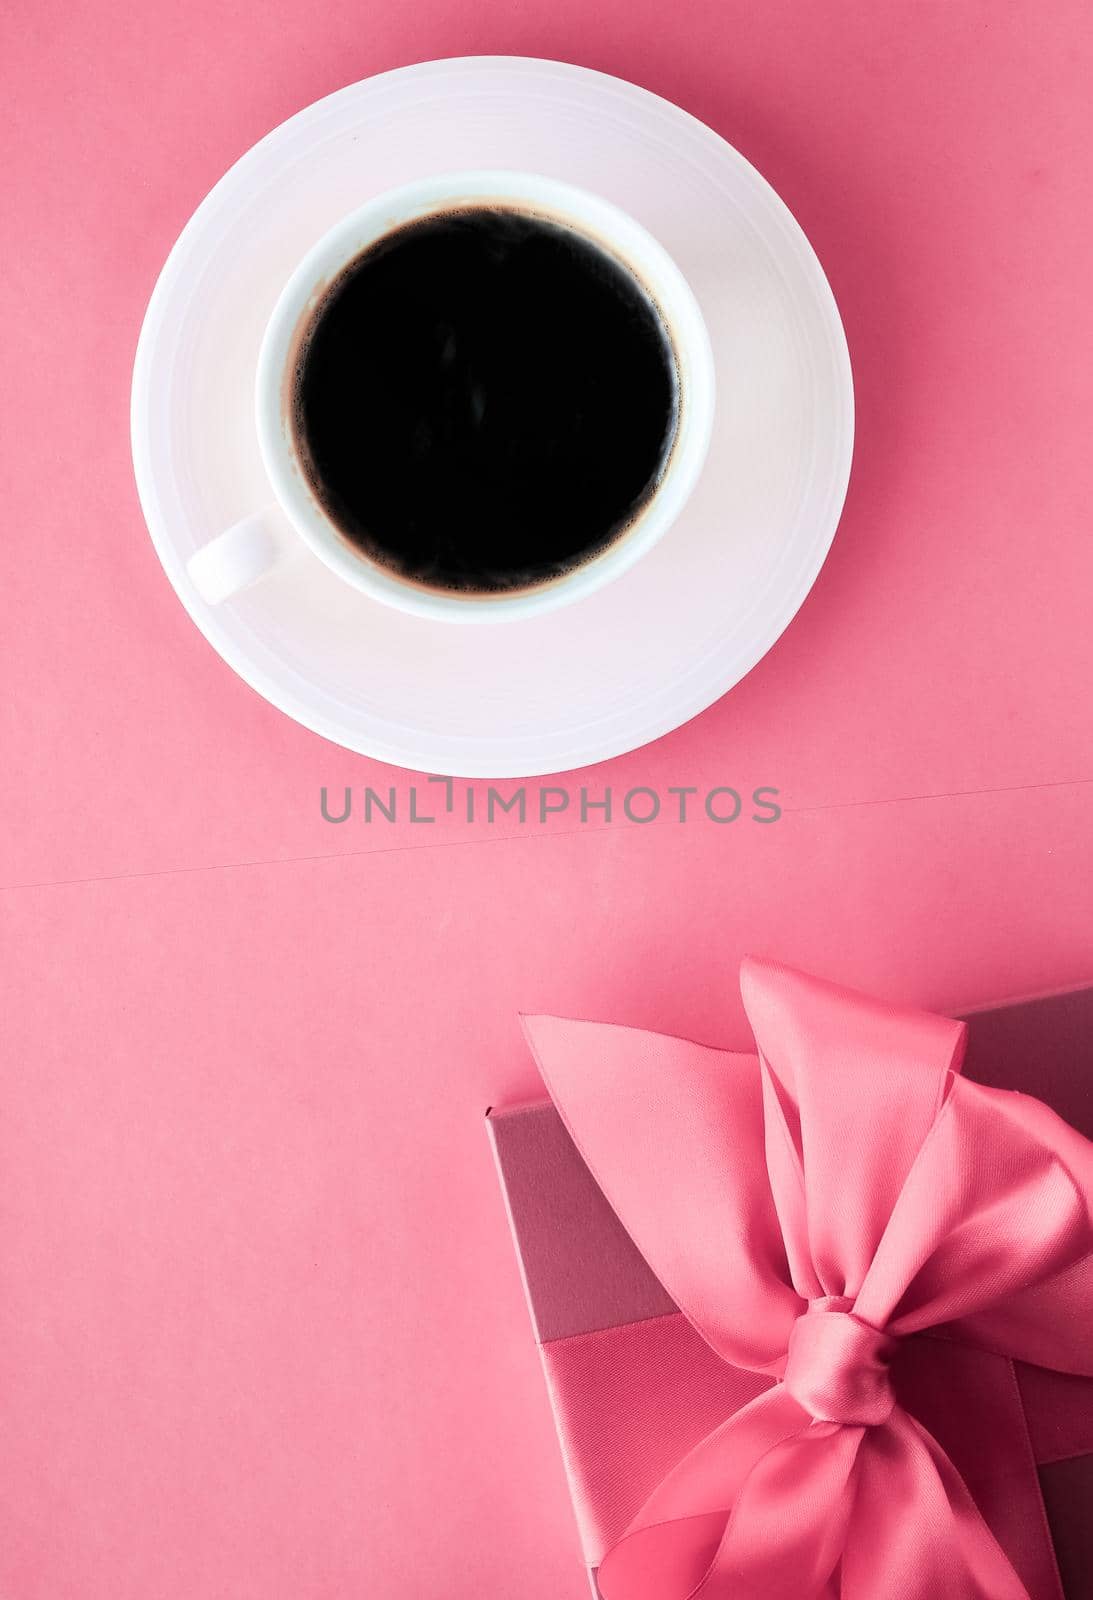 Luxury gift box and coffee cup on pink background, flatlay design for romantic holiday morning surprise by Anneleven